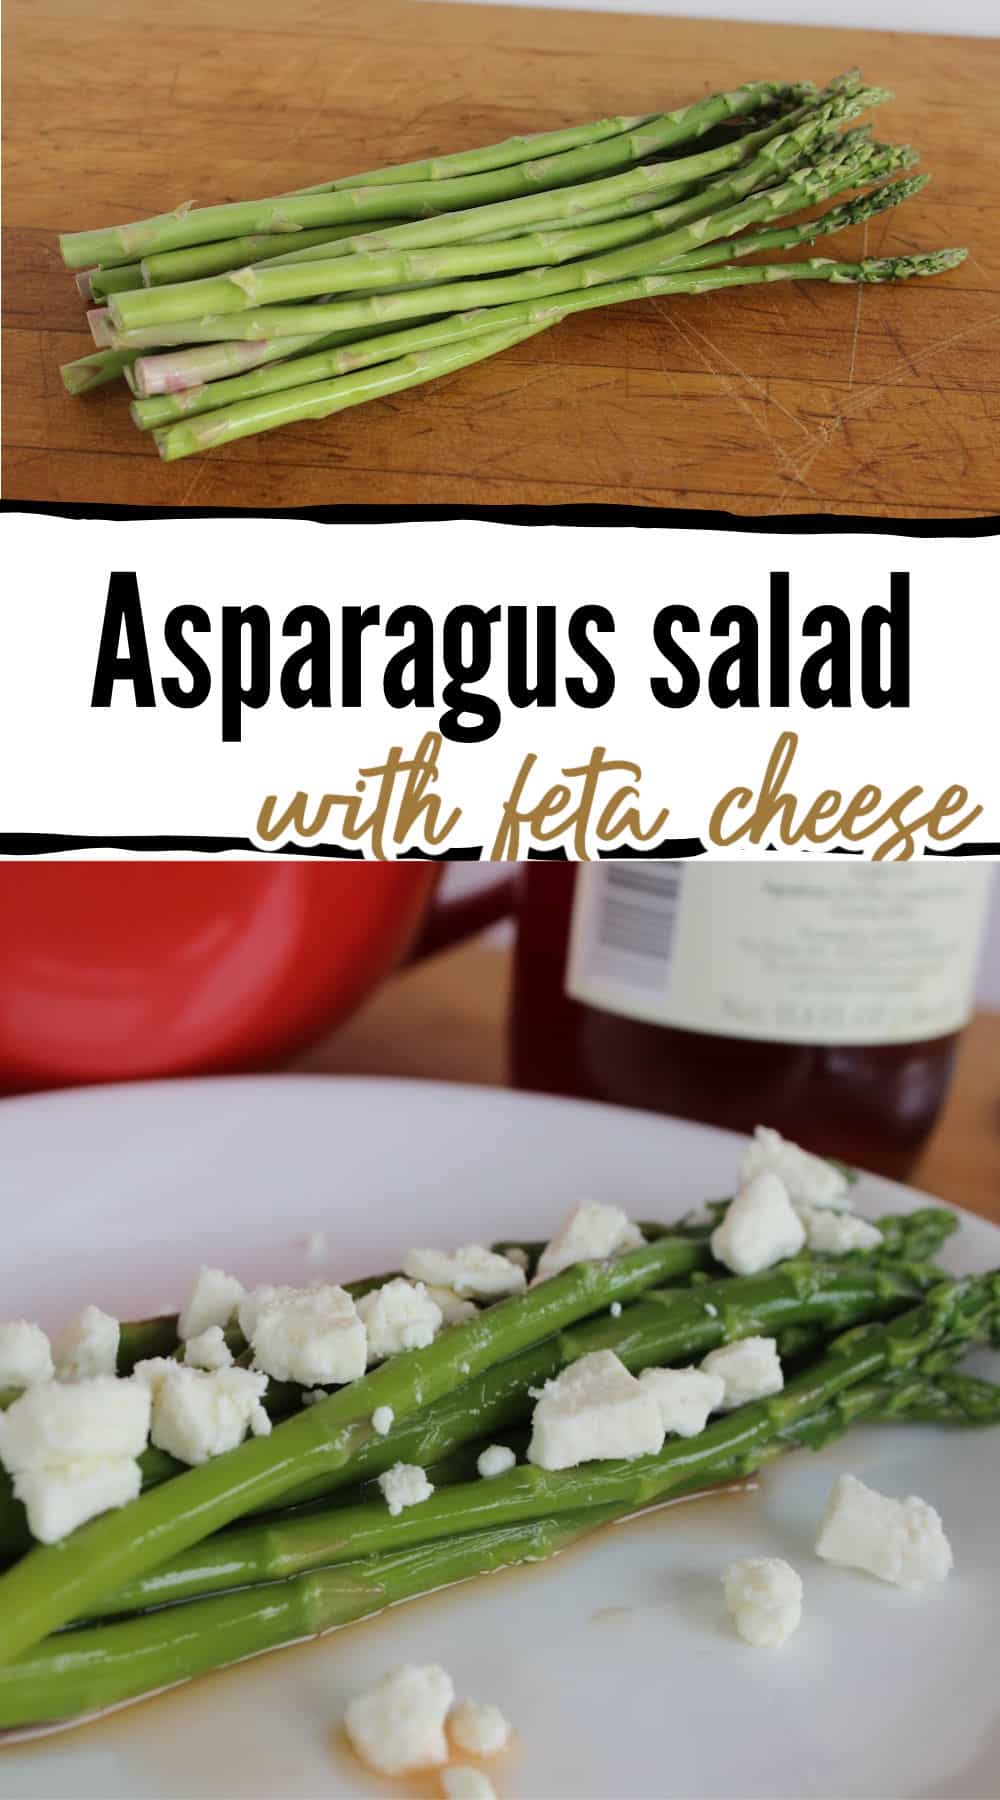 collage showing raw asparagus on top and asparagus salad with feta cheese on the bottom.